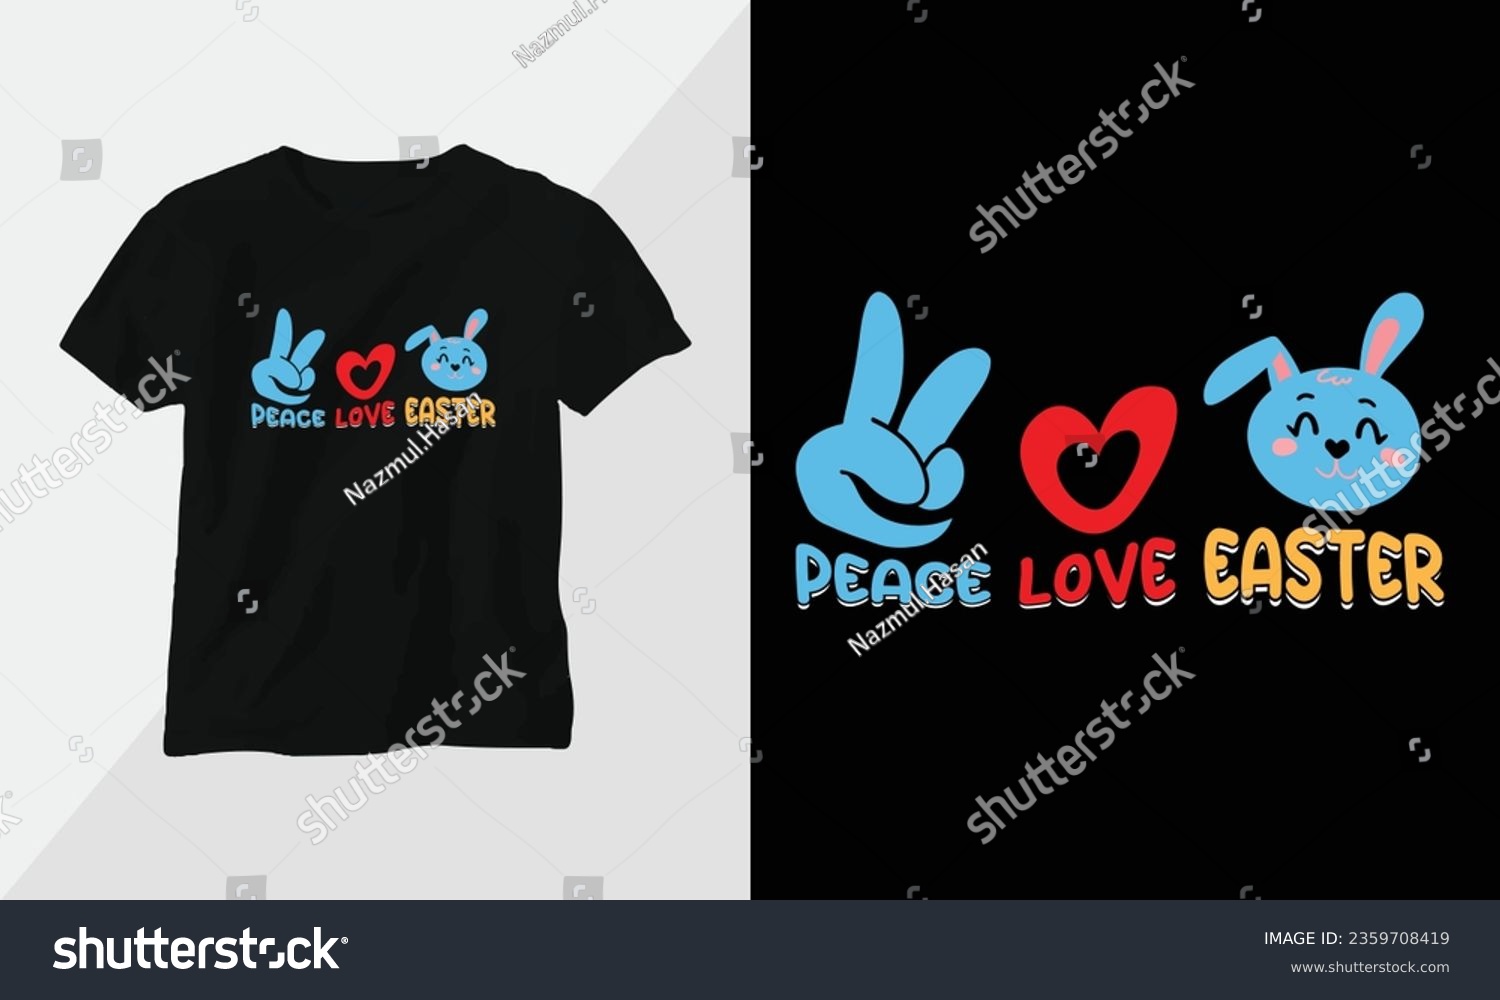 SVG of peace love easter - Retro Groovy Inspirational T-shirt Design with retro style svg